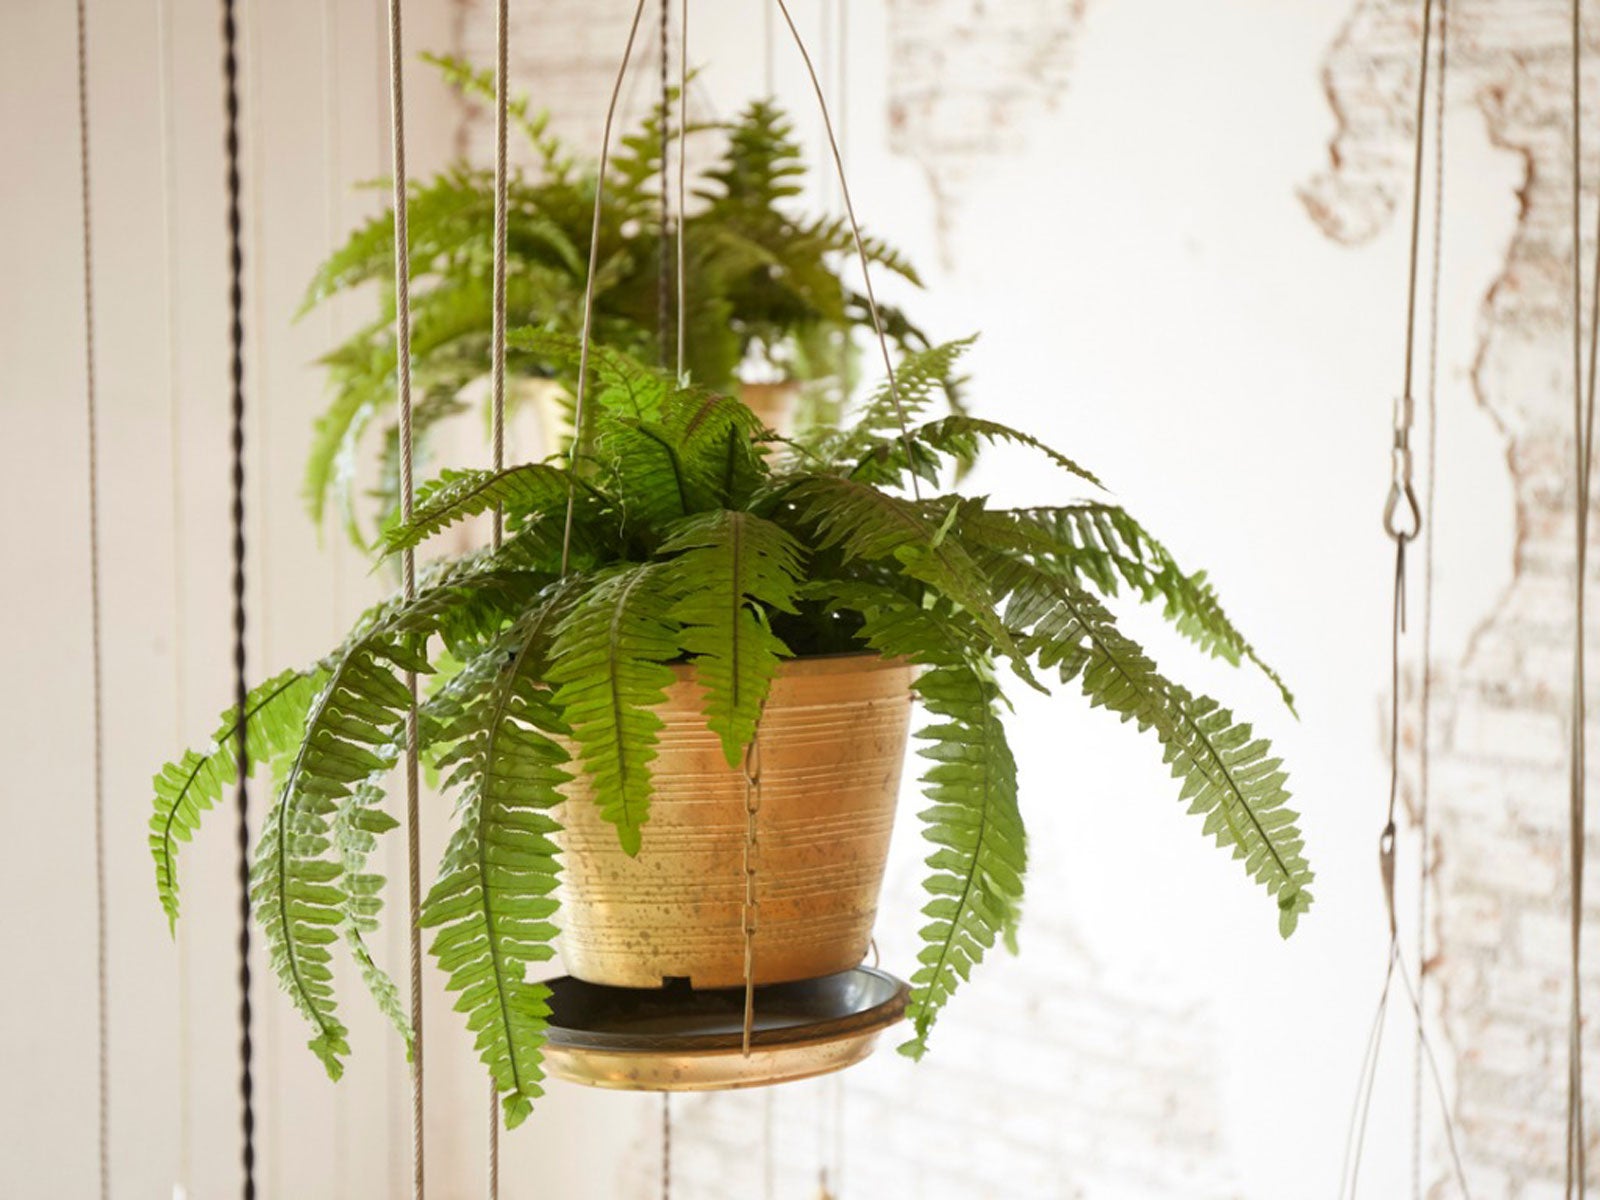 How To Care For Fern Plants In The Home